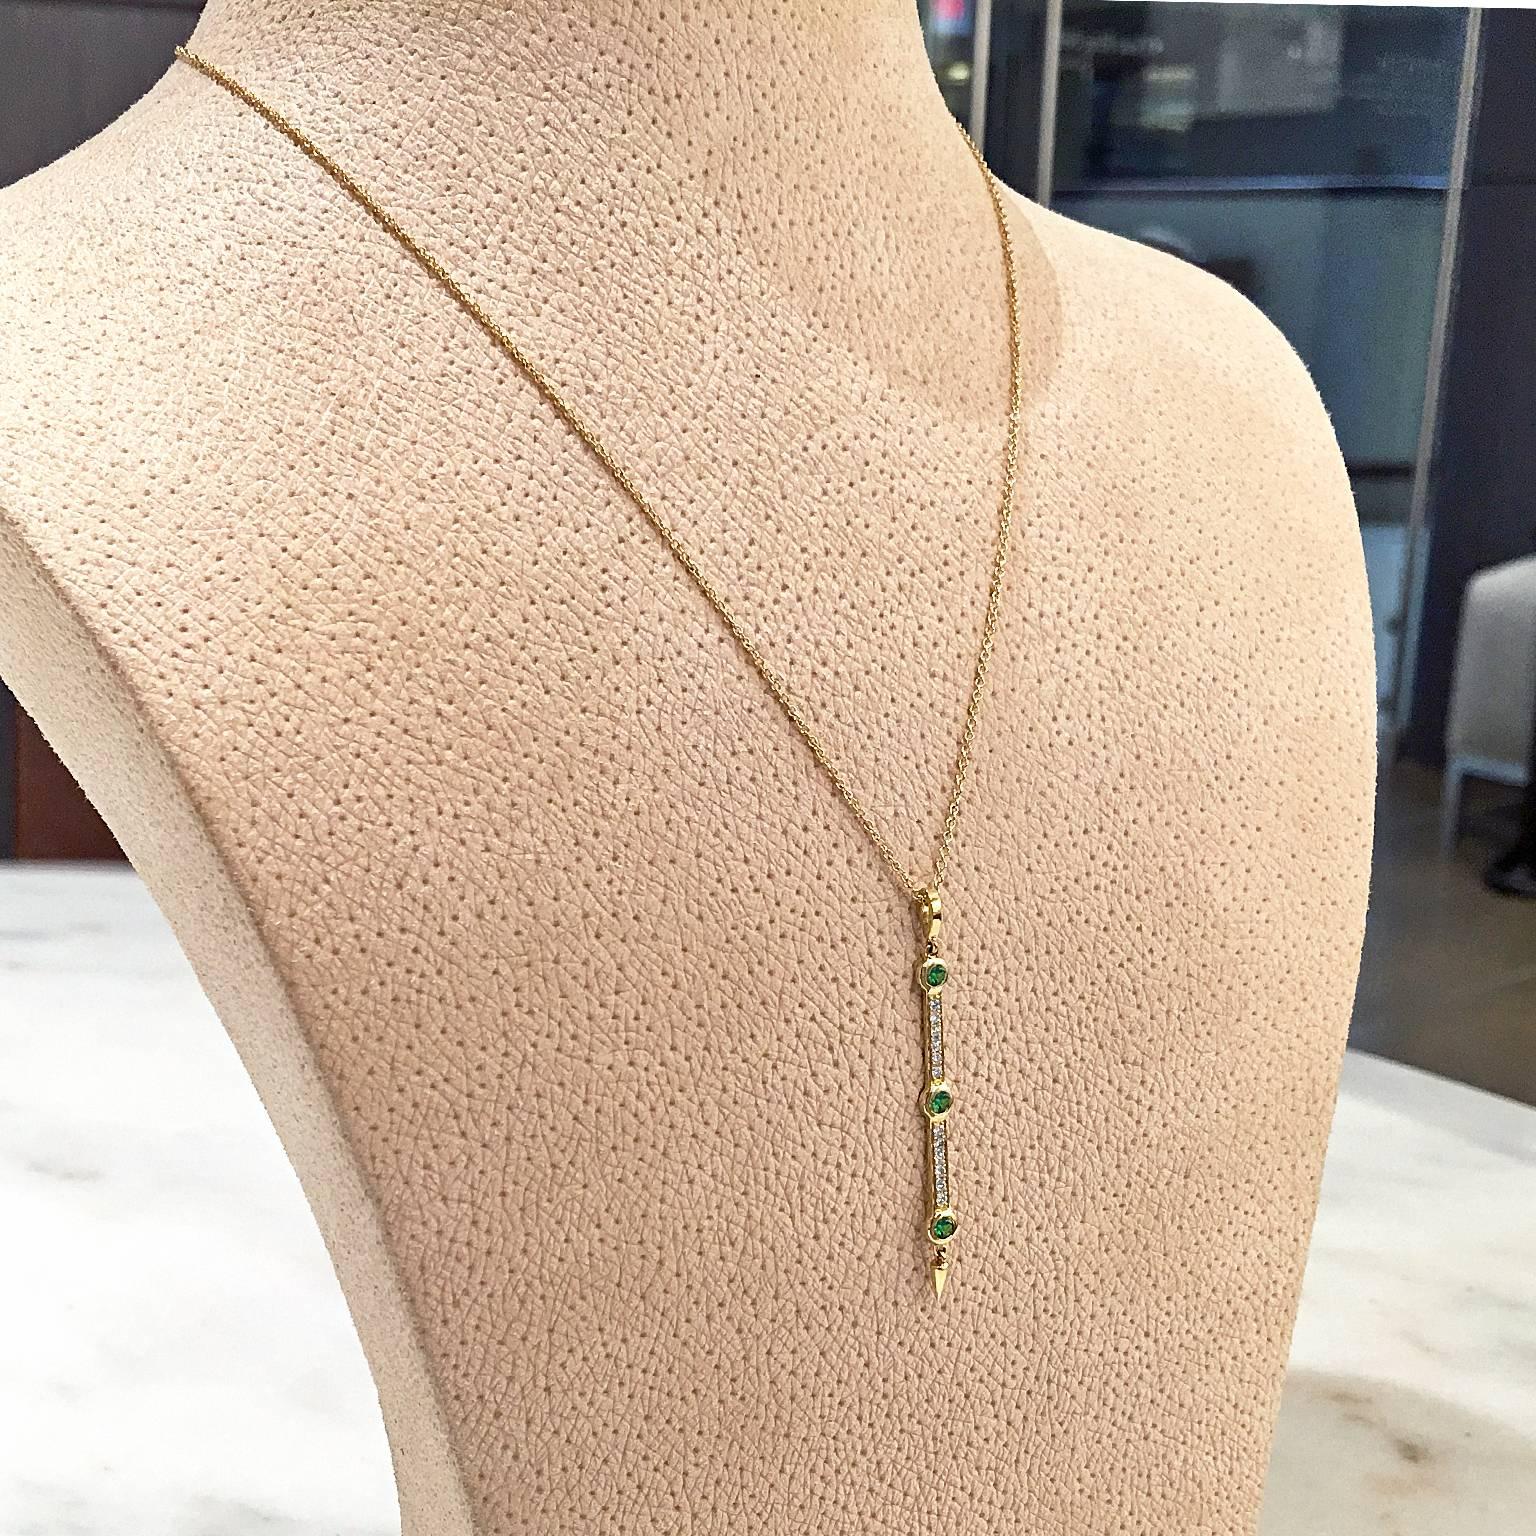 Dagger Drop Necklace featuring a pendant handcrafted in 18k yellow gold set with 0.17 total carats of ethically-sourced Tanzanian tsavorite garnets and 0.12 carats of round brilliant-cut white diamonds on a 16" 18k yellow gold chain. Total